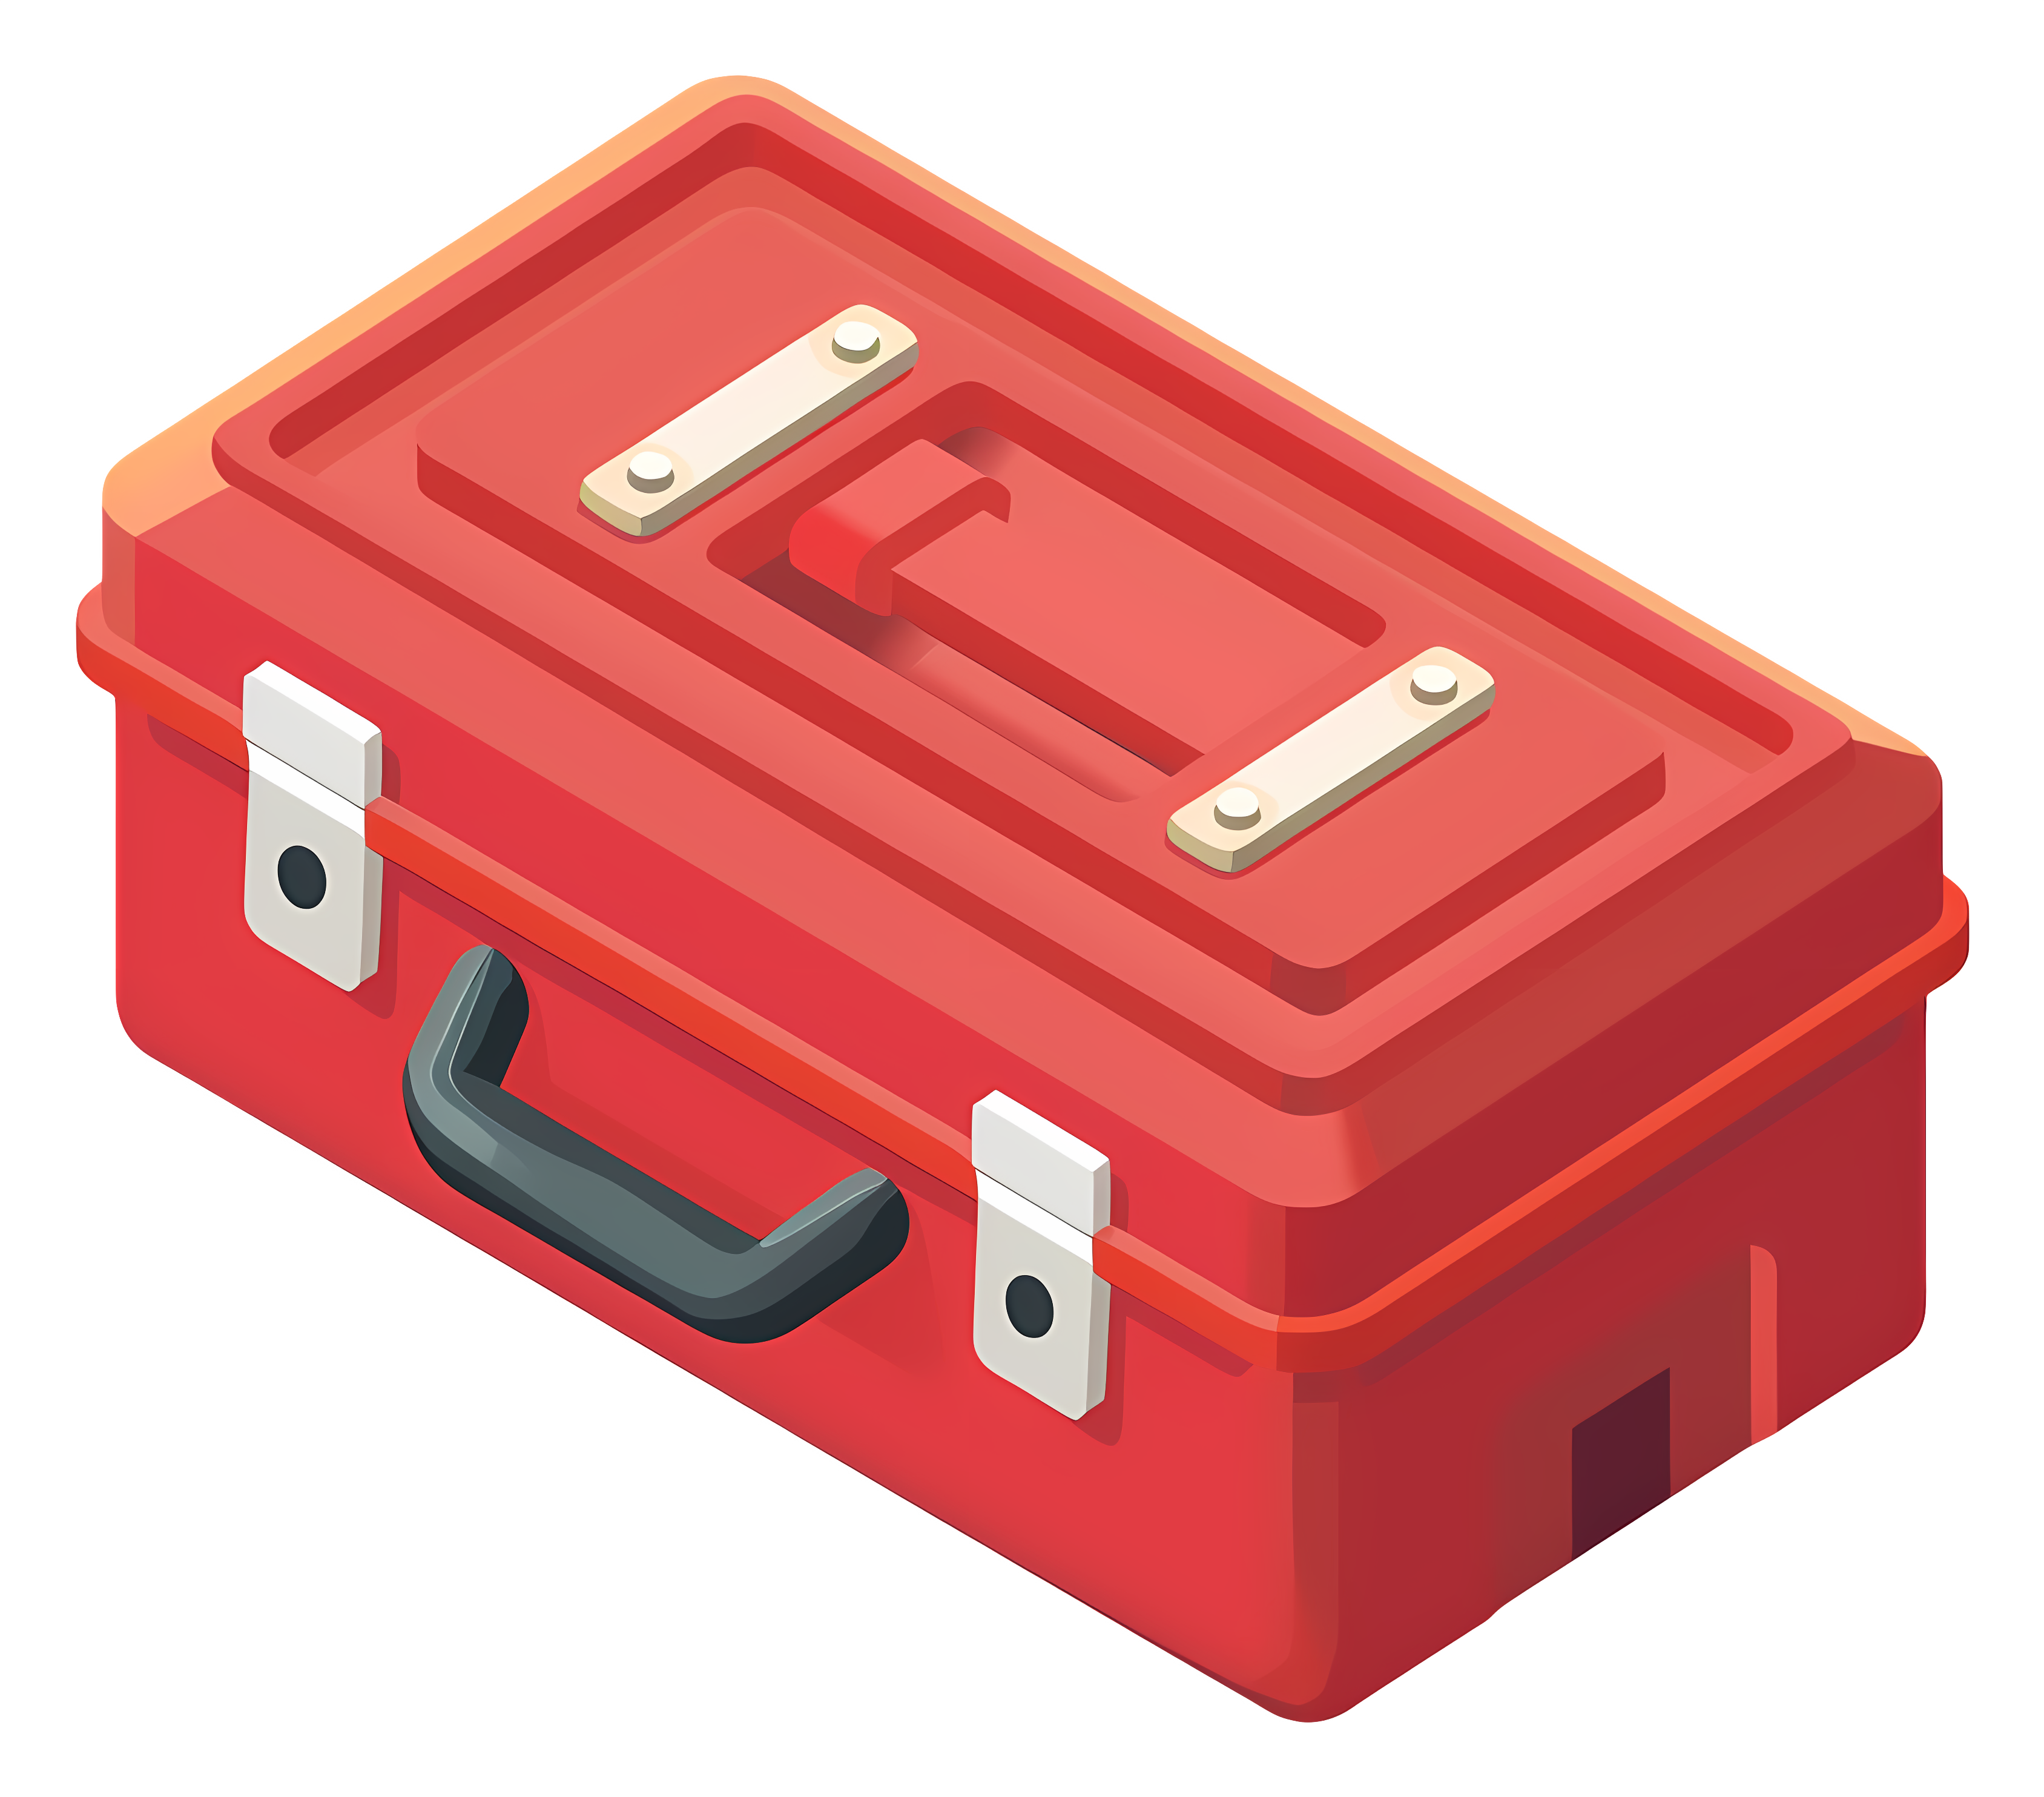 Red tool box with metal clasps Clipart